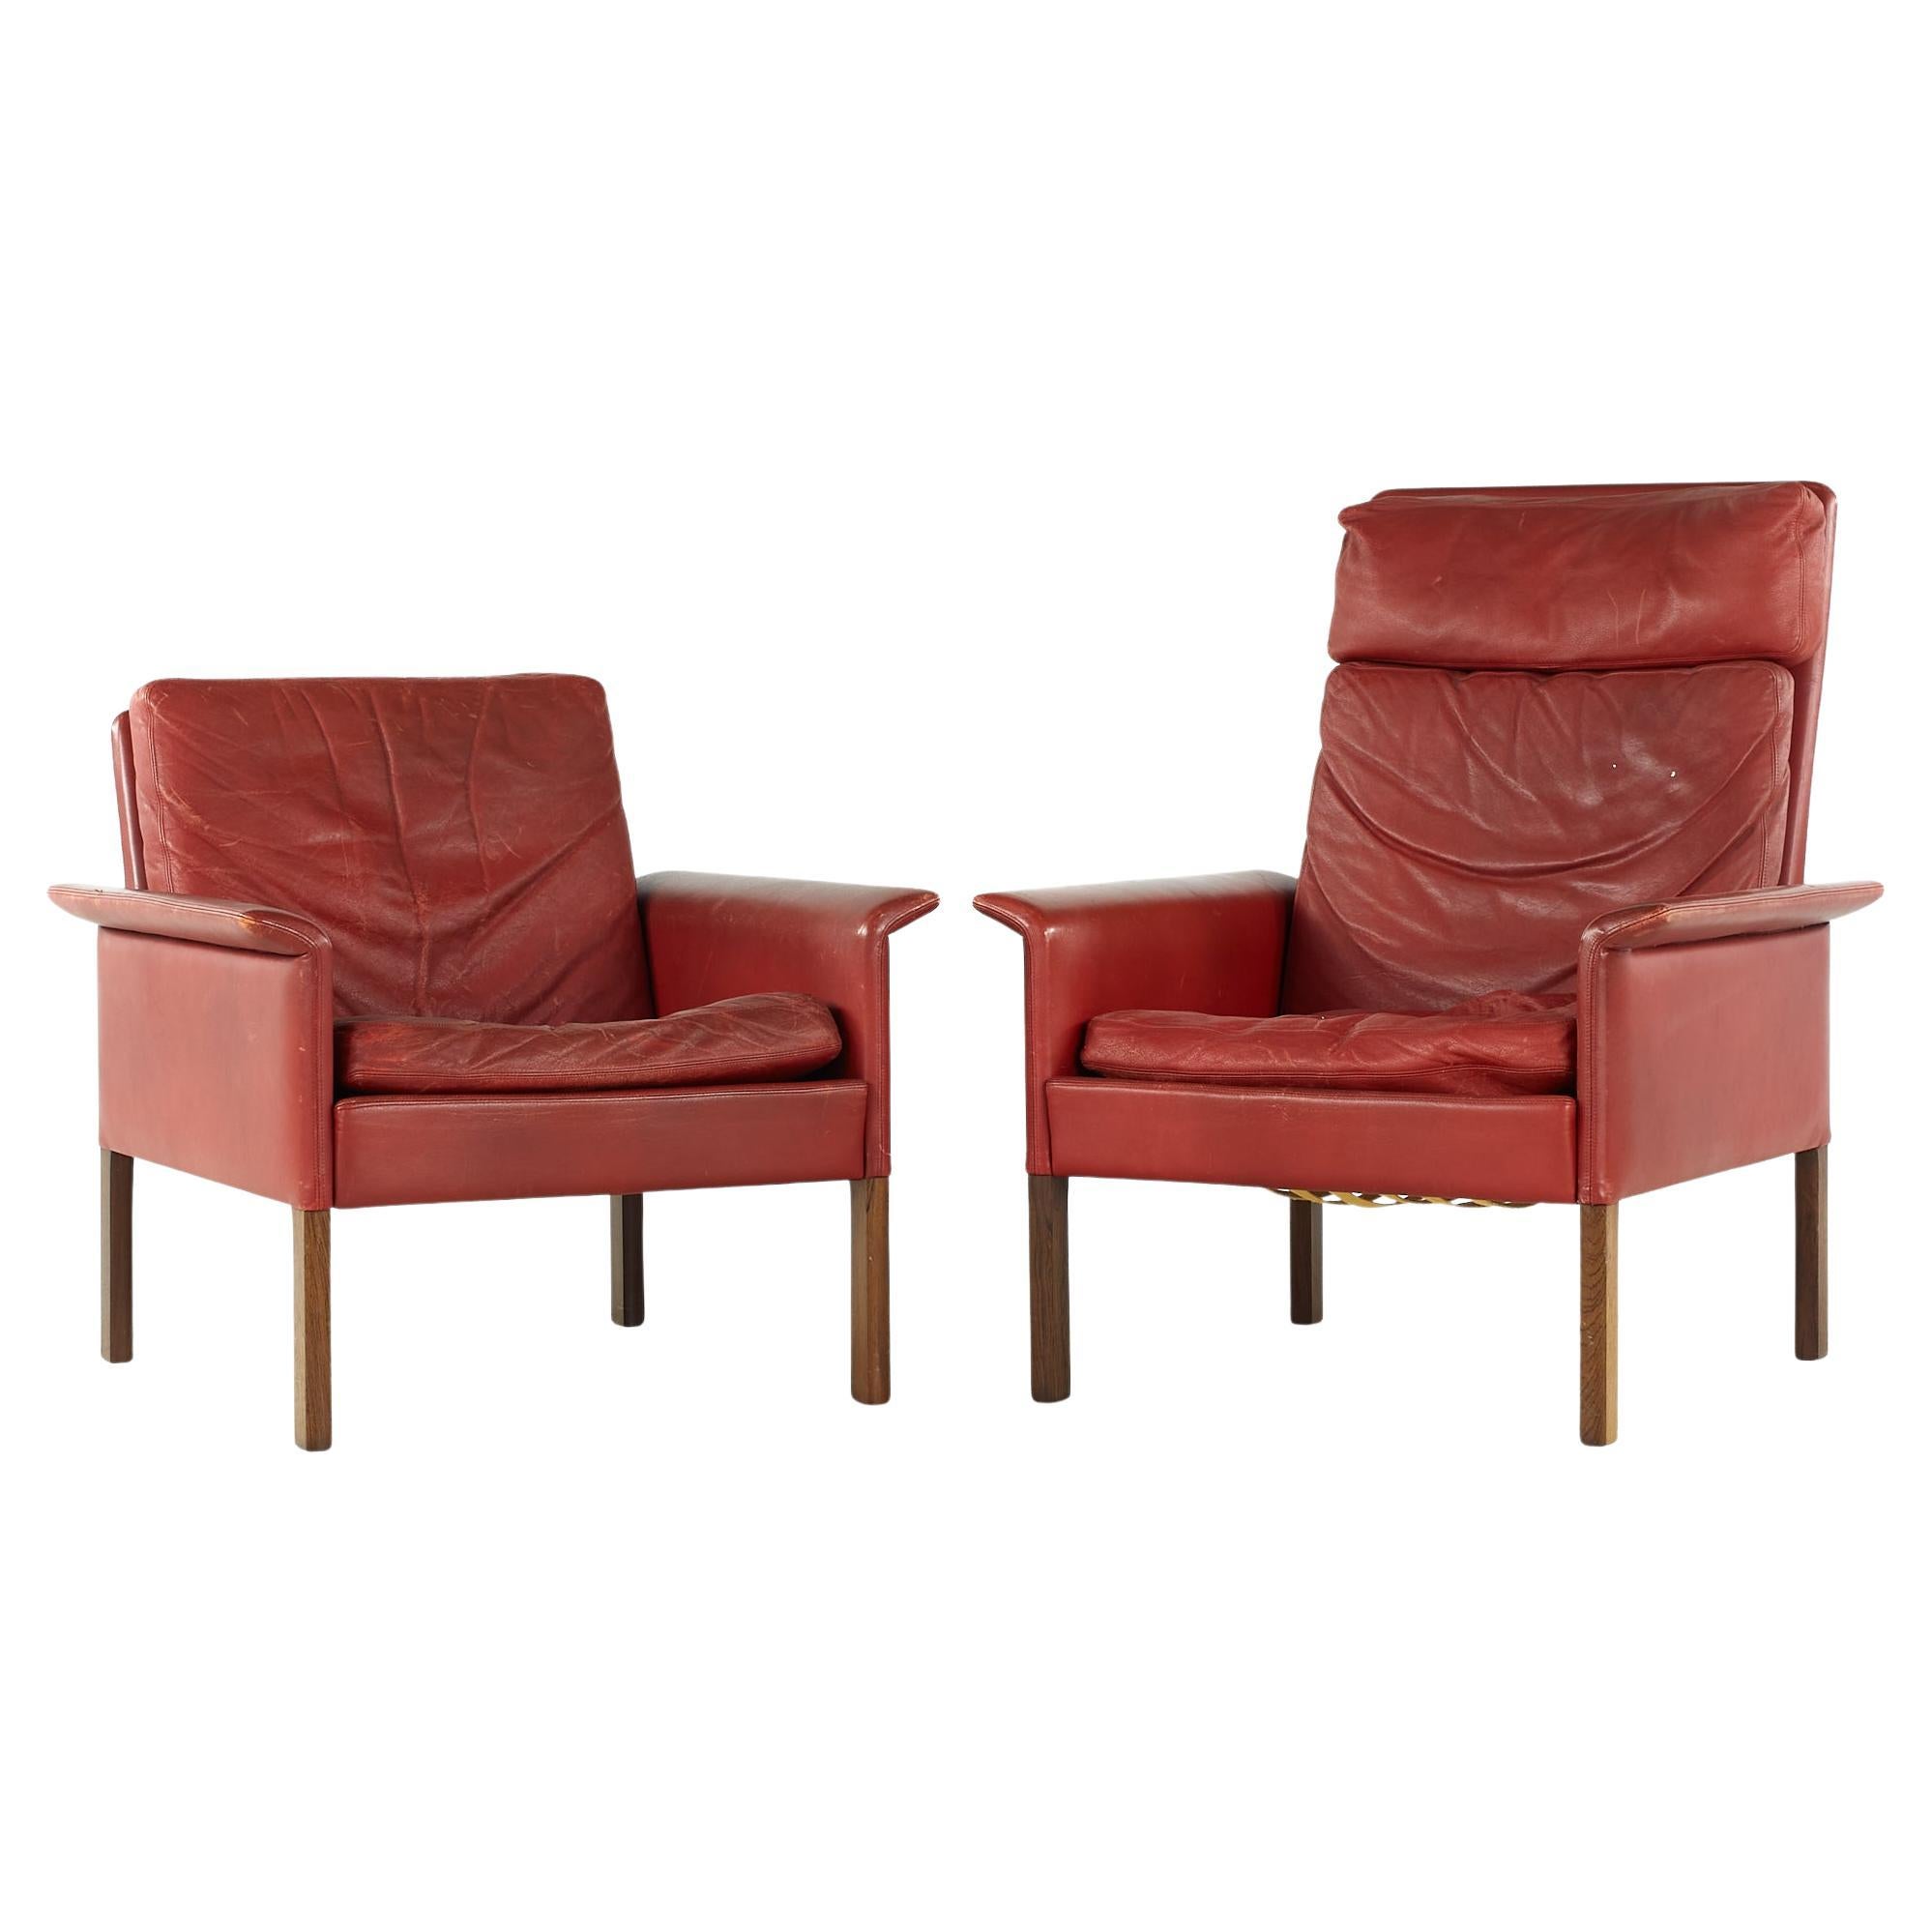 Hans Olsen Midcentury Danish Rosewood and Red Leather Chairs, Pair For Sale